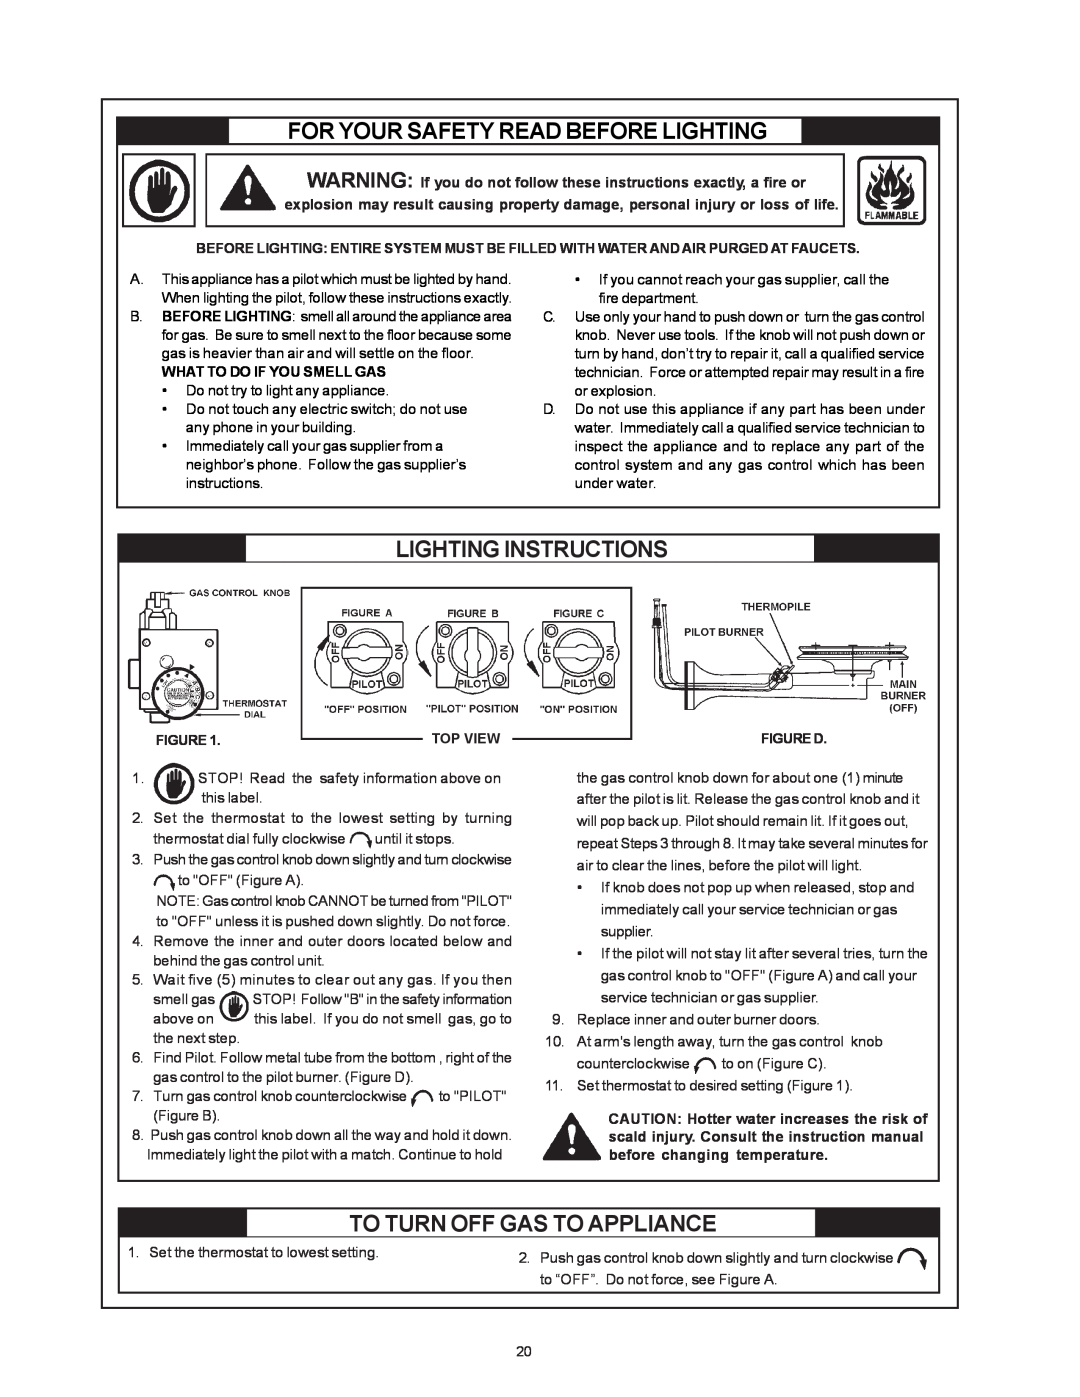 Maytag HRP4975S manual For Your Safety Read Before Lighting, Lighting Instructions, To Turn Off Gas To Appliance, Top View 